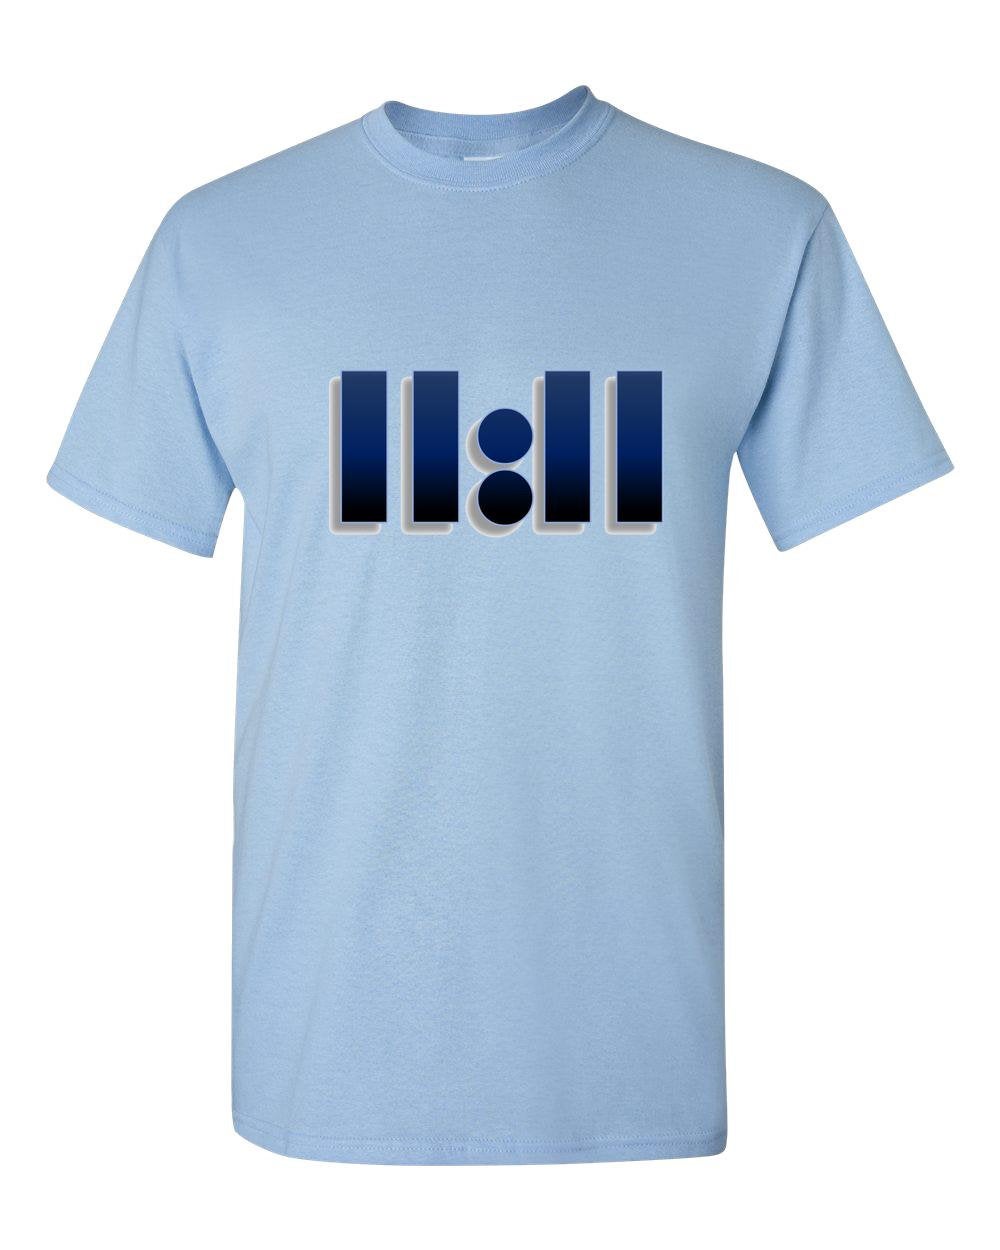 Numbers 11:11 - Adult Unisex T-Shirt  Law of Attraction Eleven Eleven